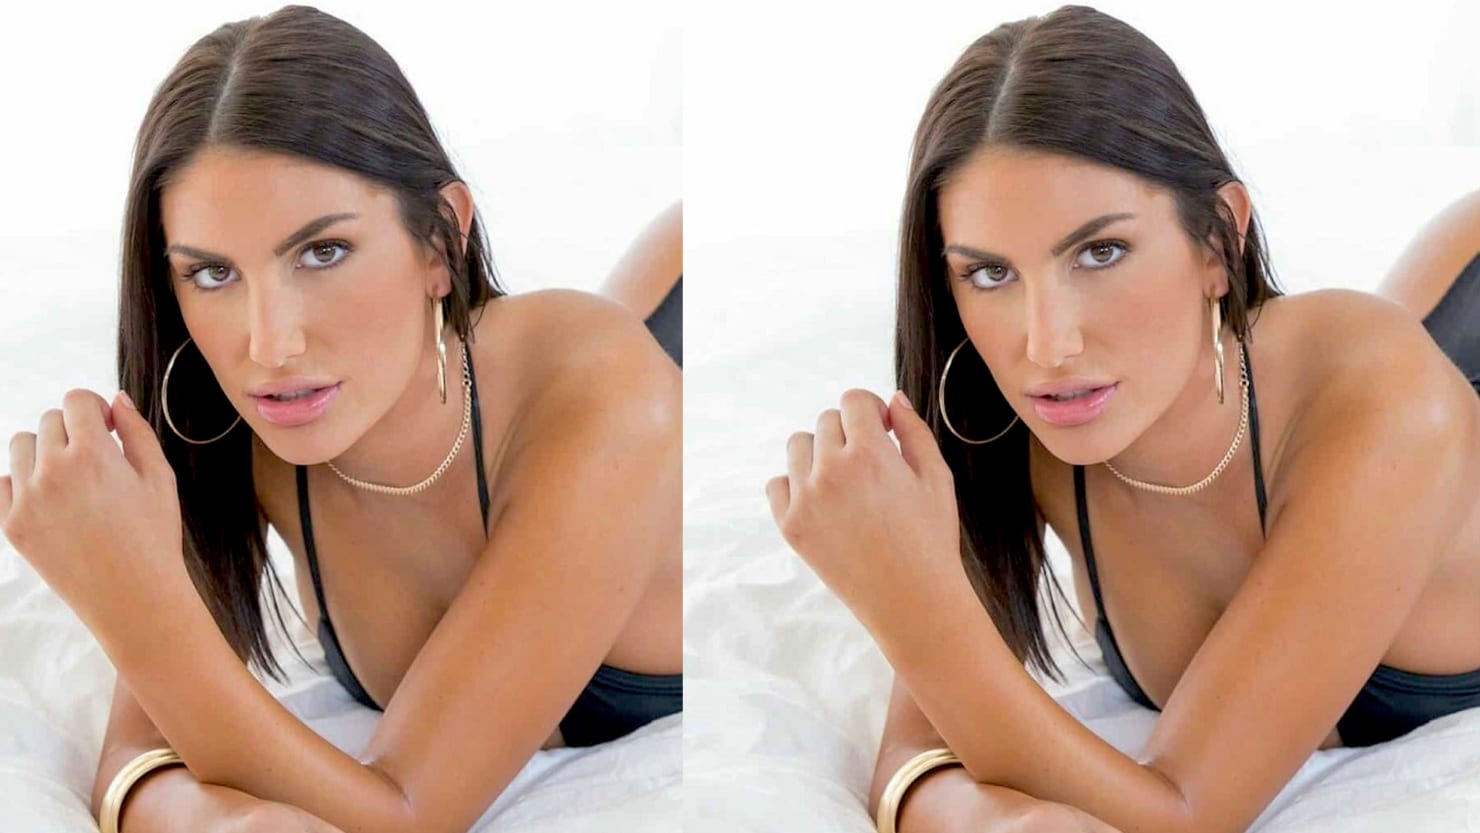 Mother of Cyberbullied Porn Star August Ames Opens Up About Her Last Days photo